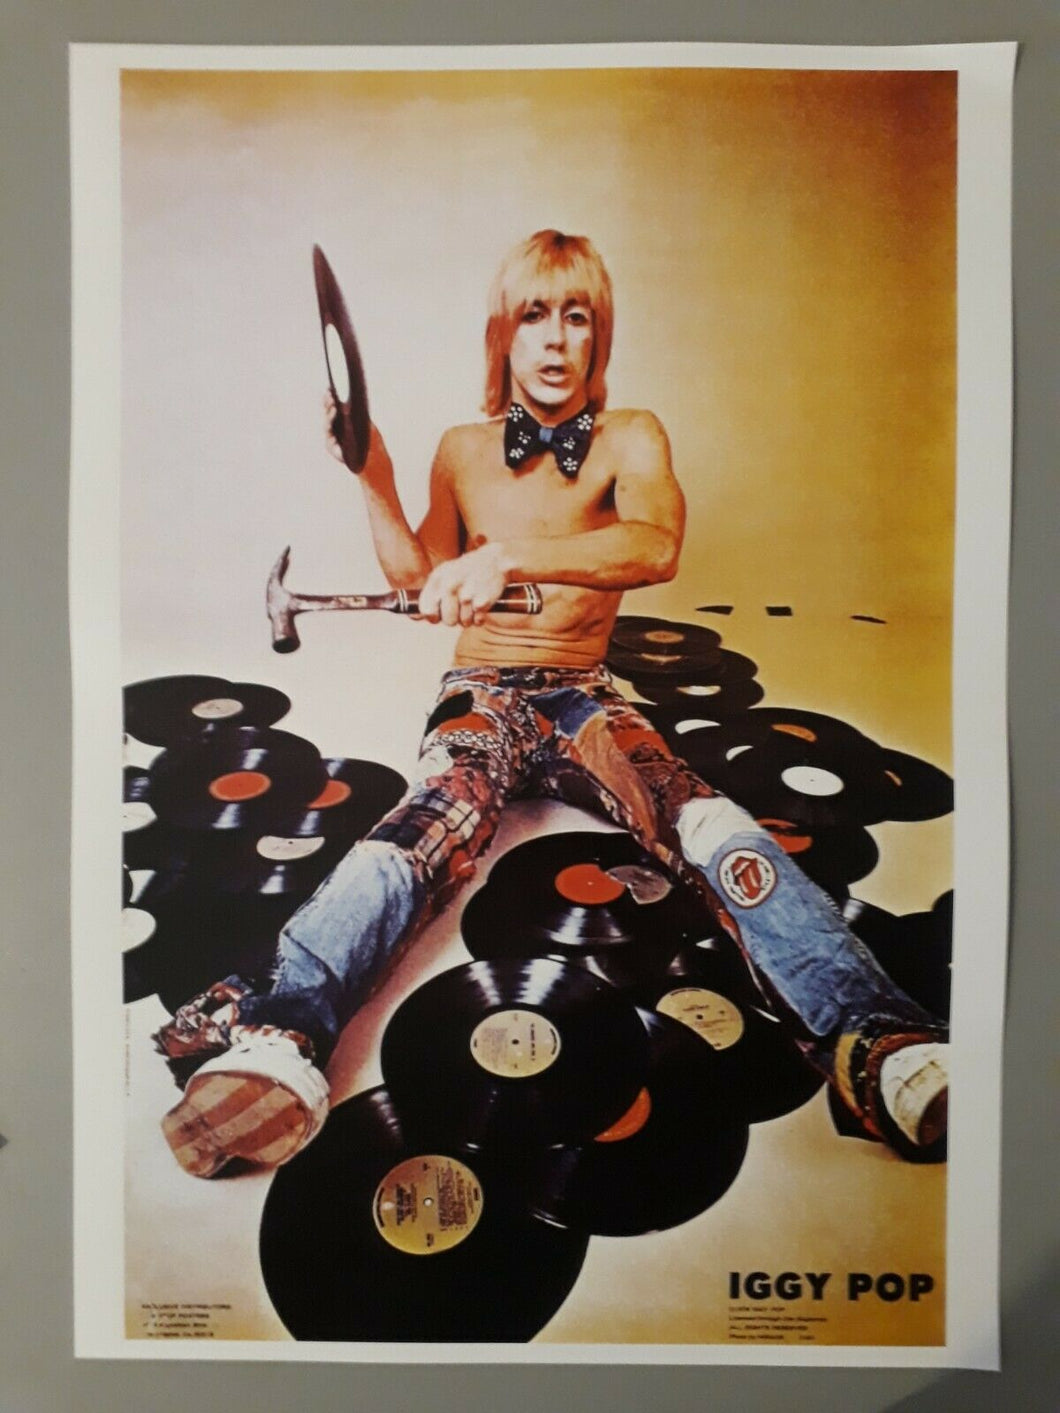 Iggy Pop & Stooges poster - Breaking records promo 1973 fantastic new reprinted edition - Original Music and Movie Posters for sale from Bamalama - Online Poster Store UK London